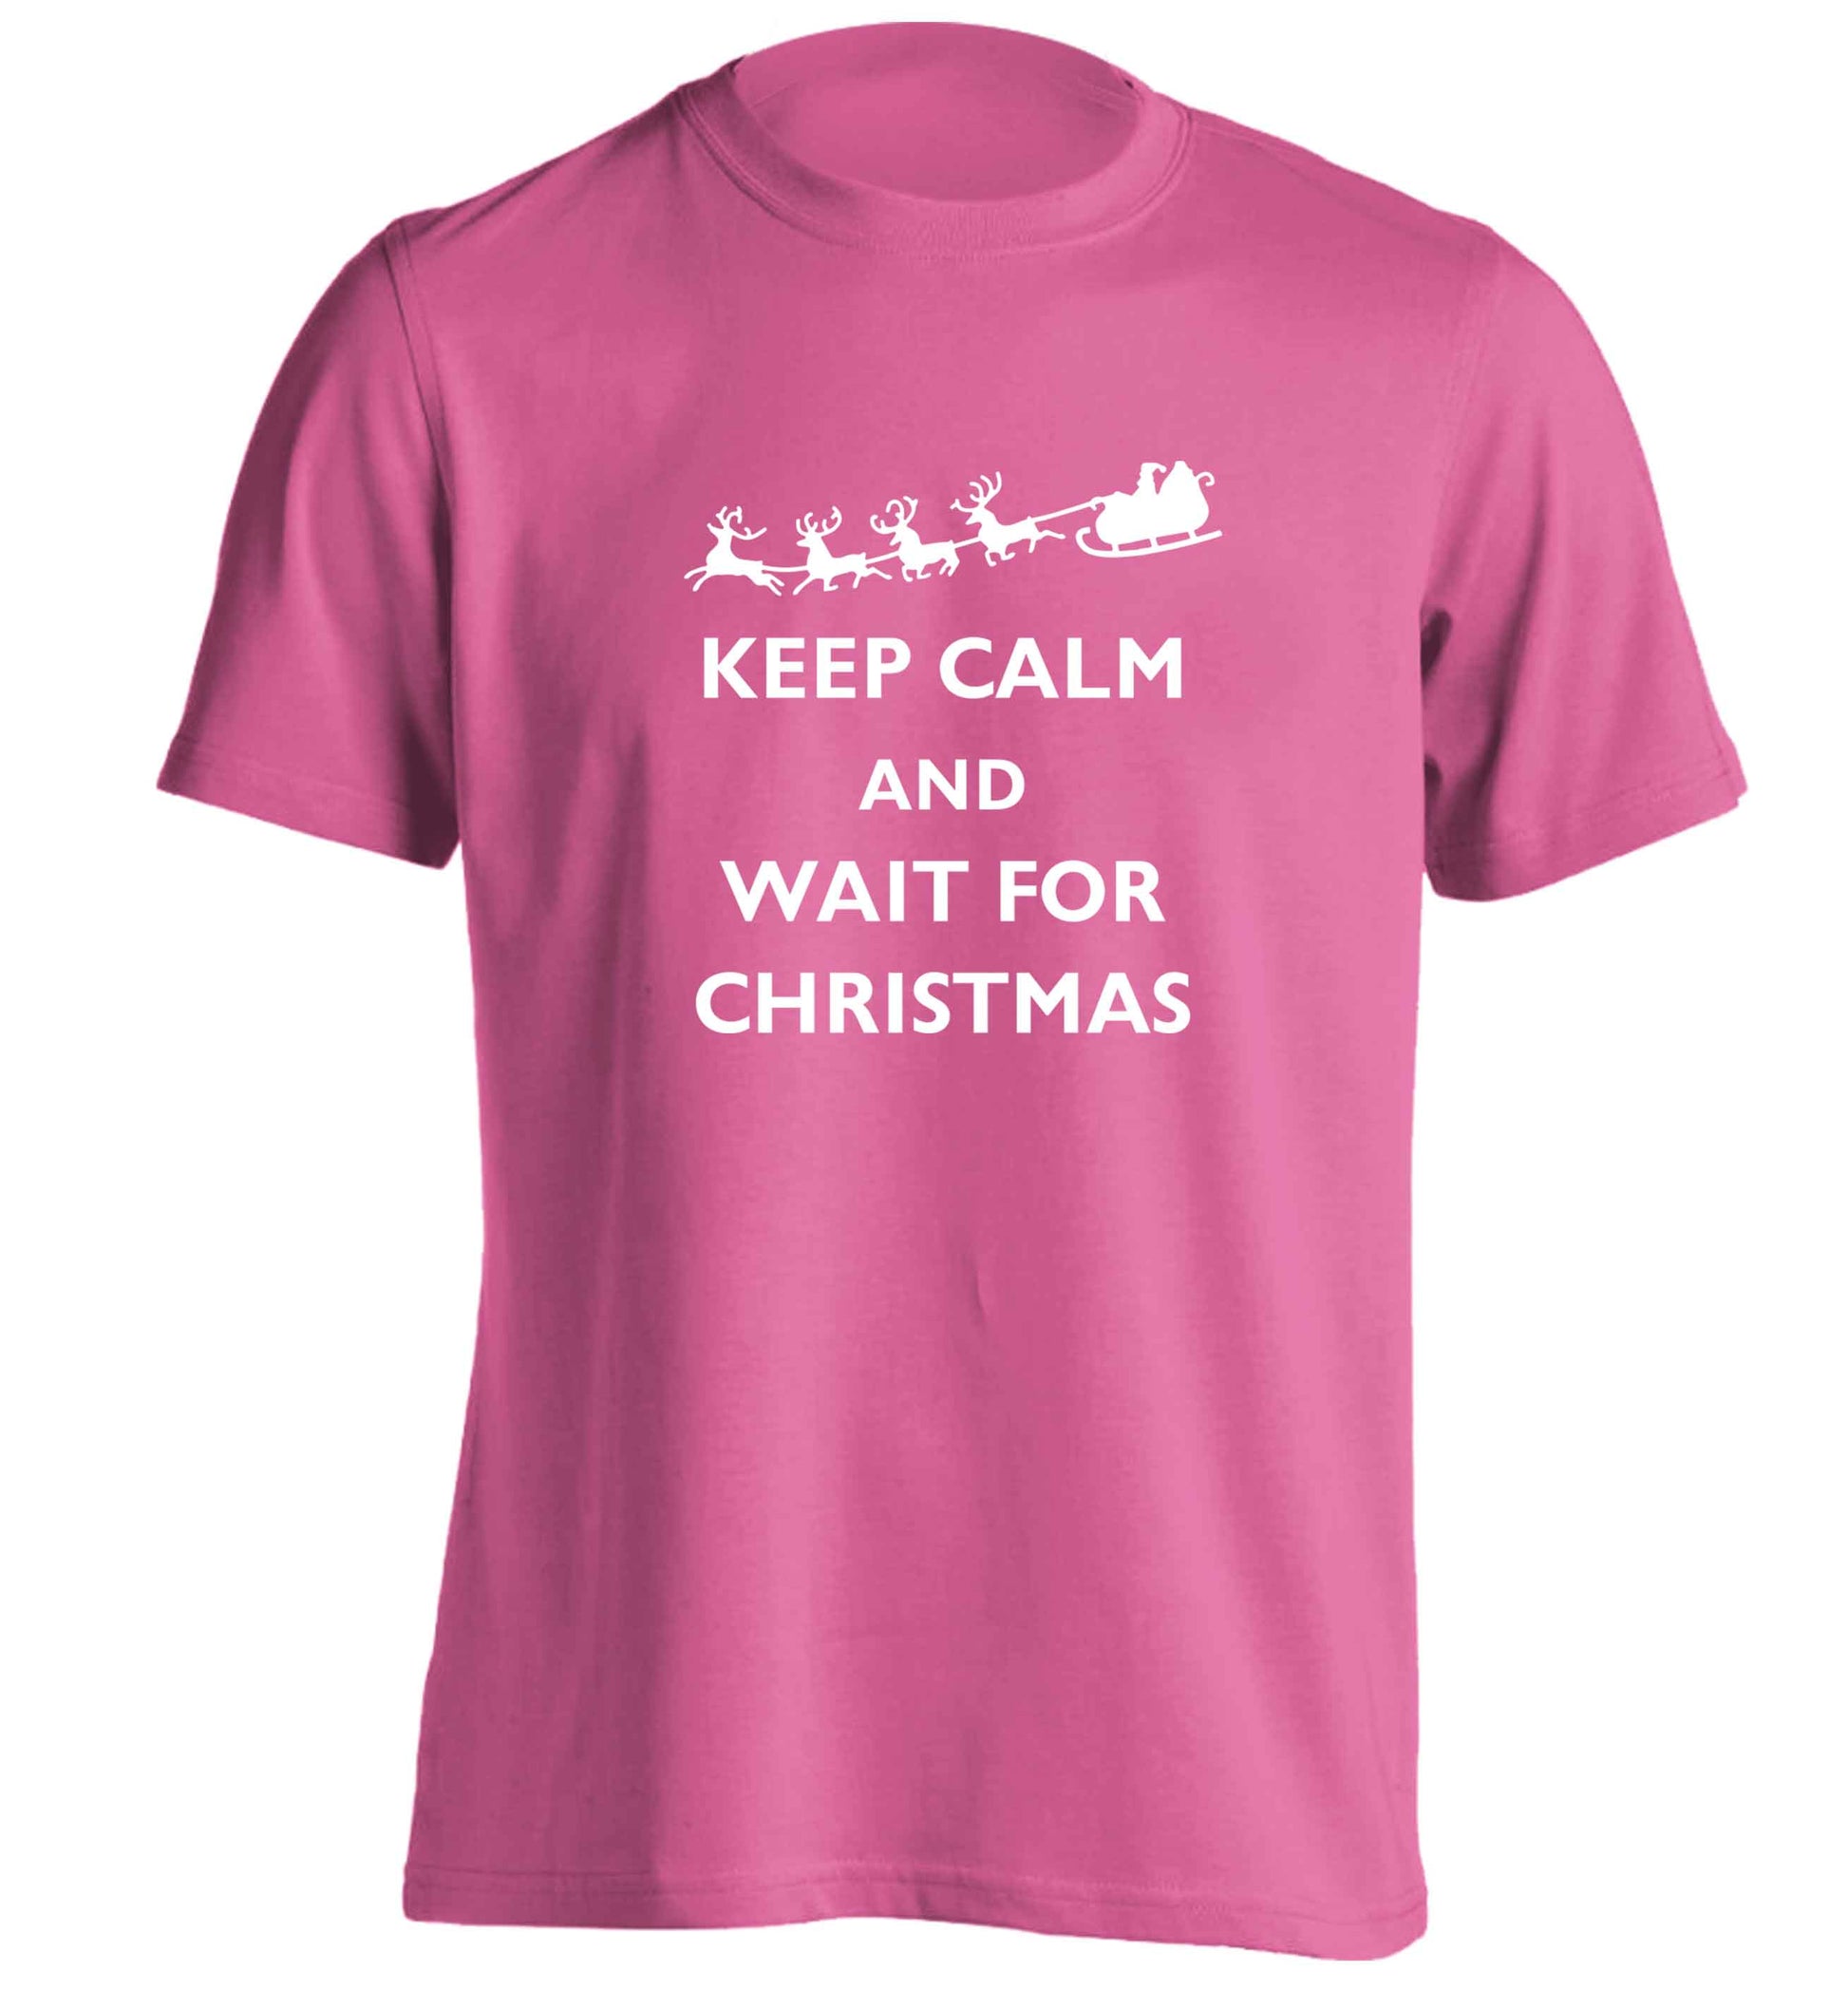 Keep calm and wait for Christmas adults unisex pink Tshirt 2XL